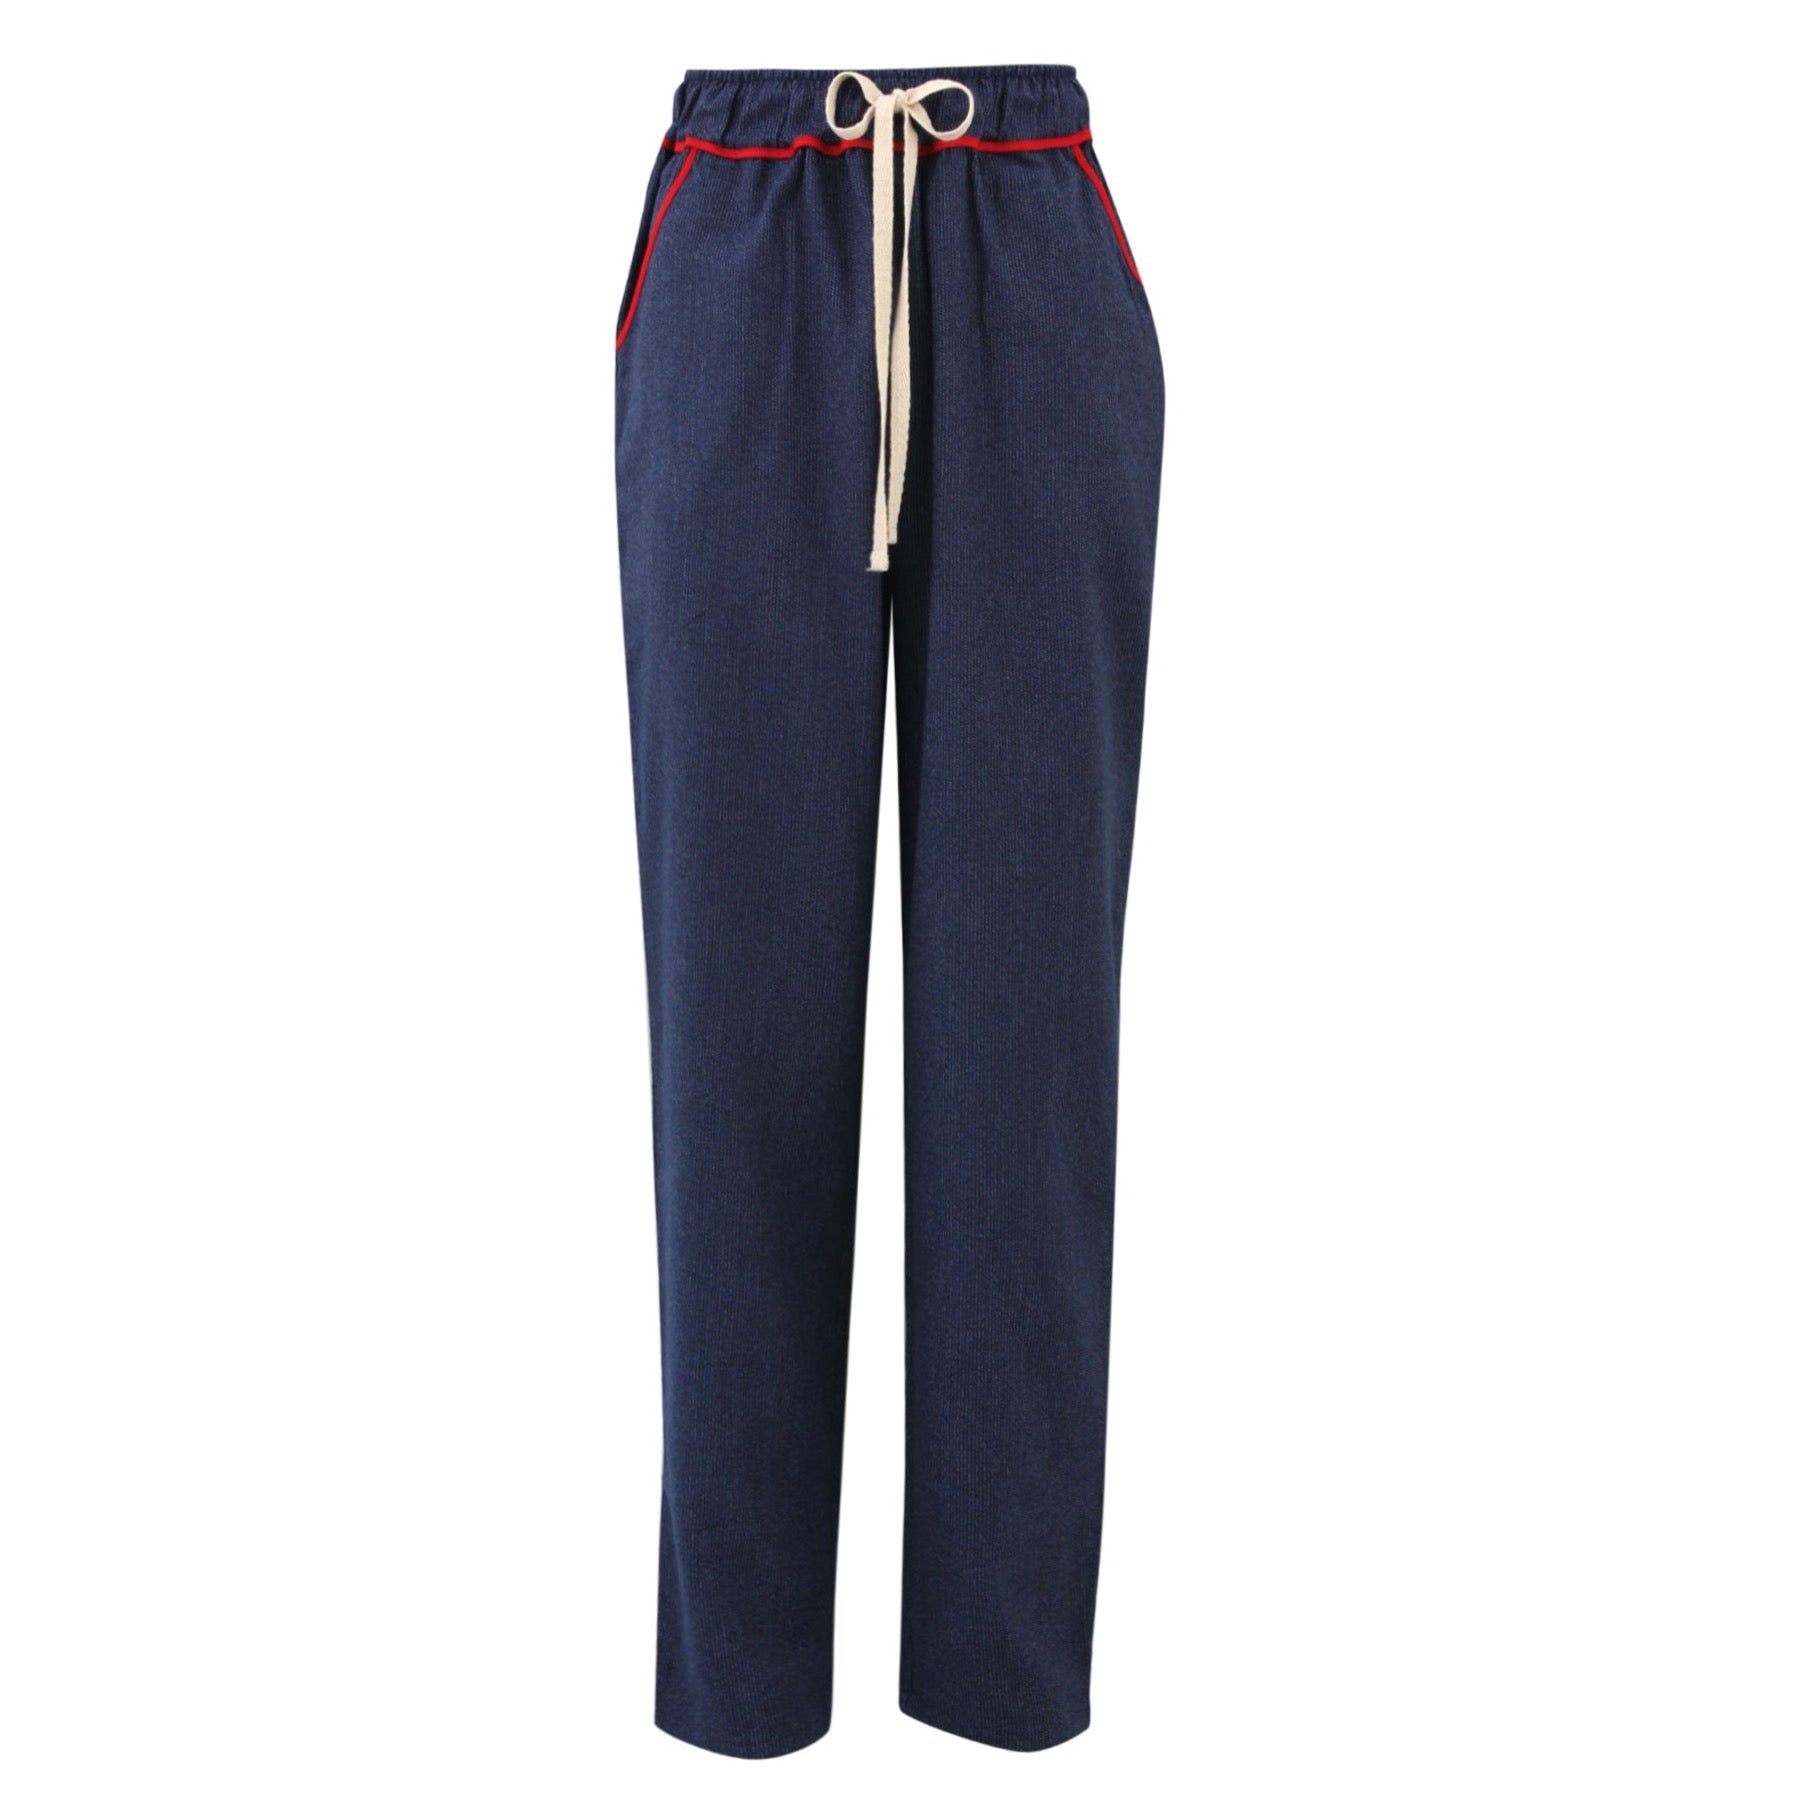 Blue Pyjama Pants with Red Piping Detail